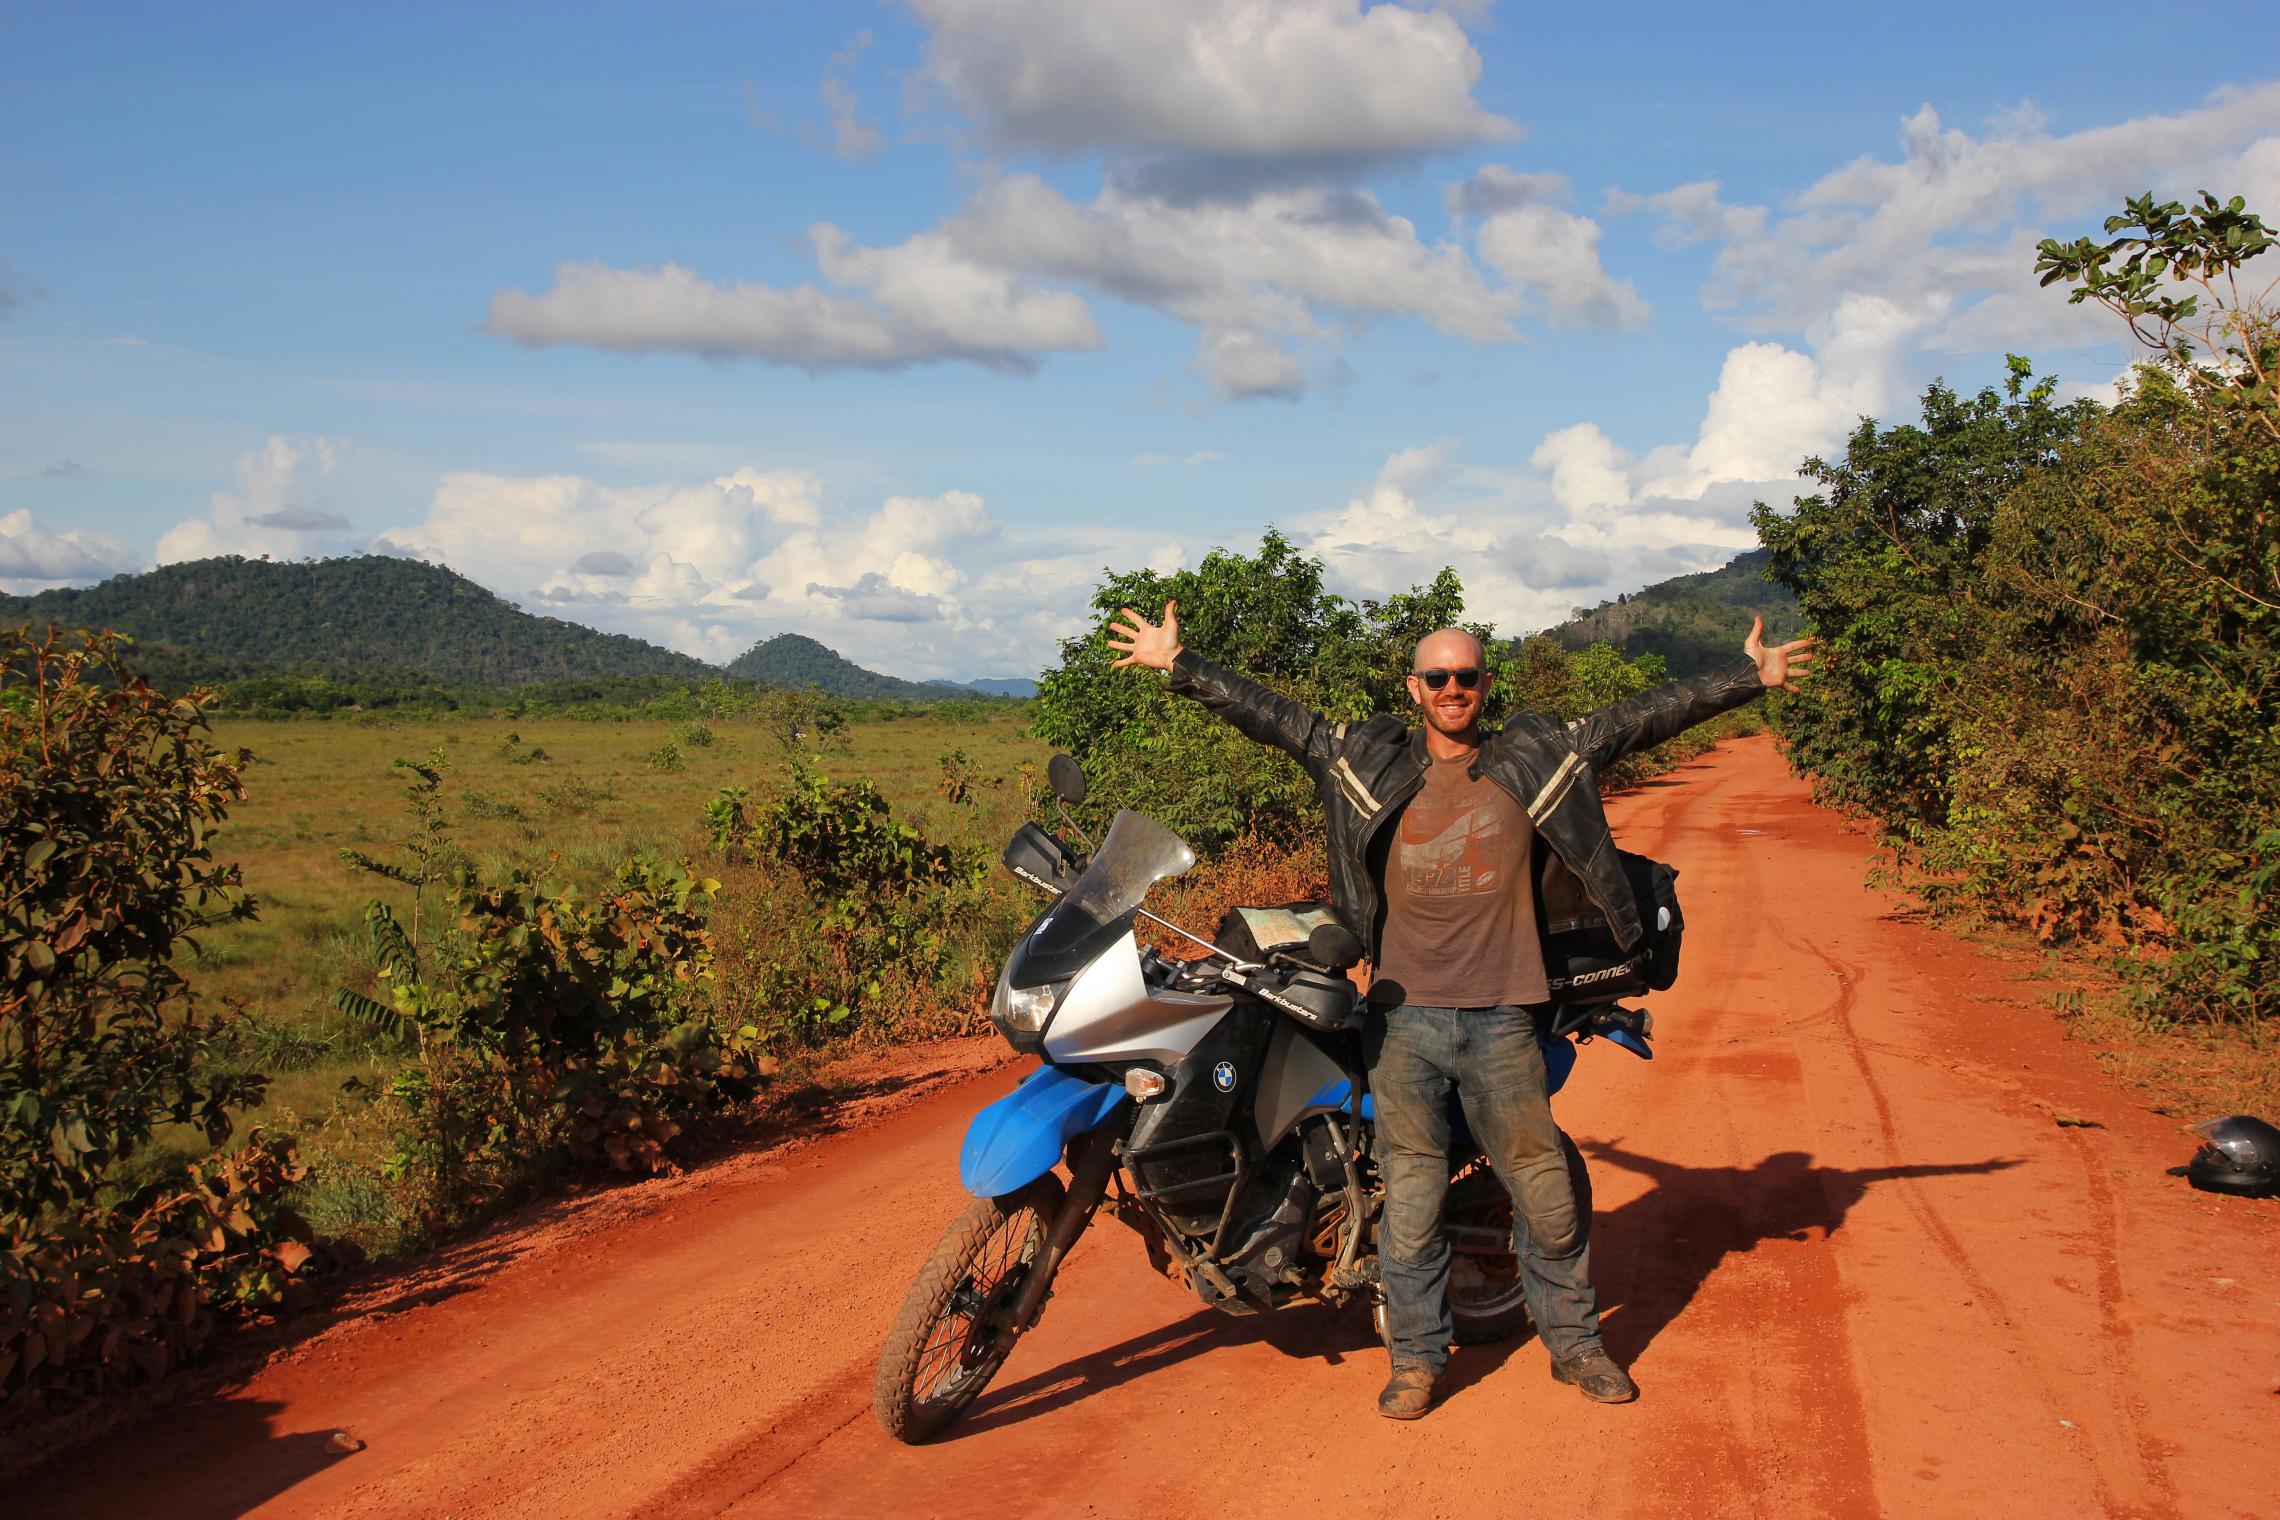 10,000 miles - The road to Annai, Guyana -- This dirt road is actually the big international highway through the Guyanese interior. It was still fun and games before we entered the rainforest.